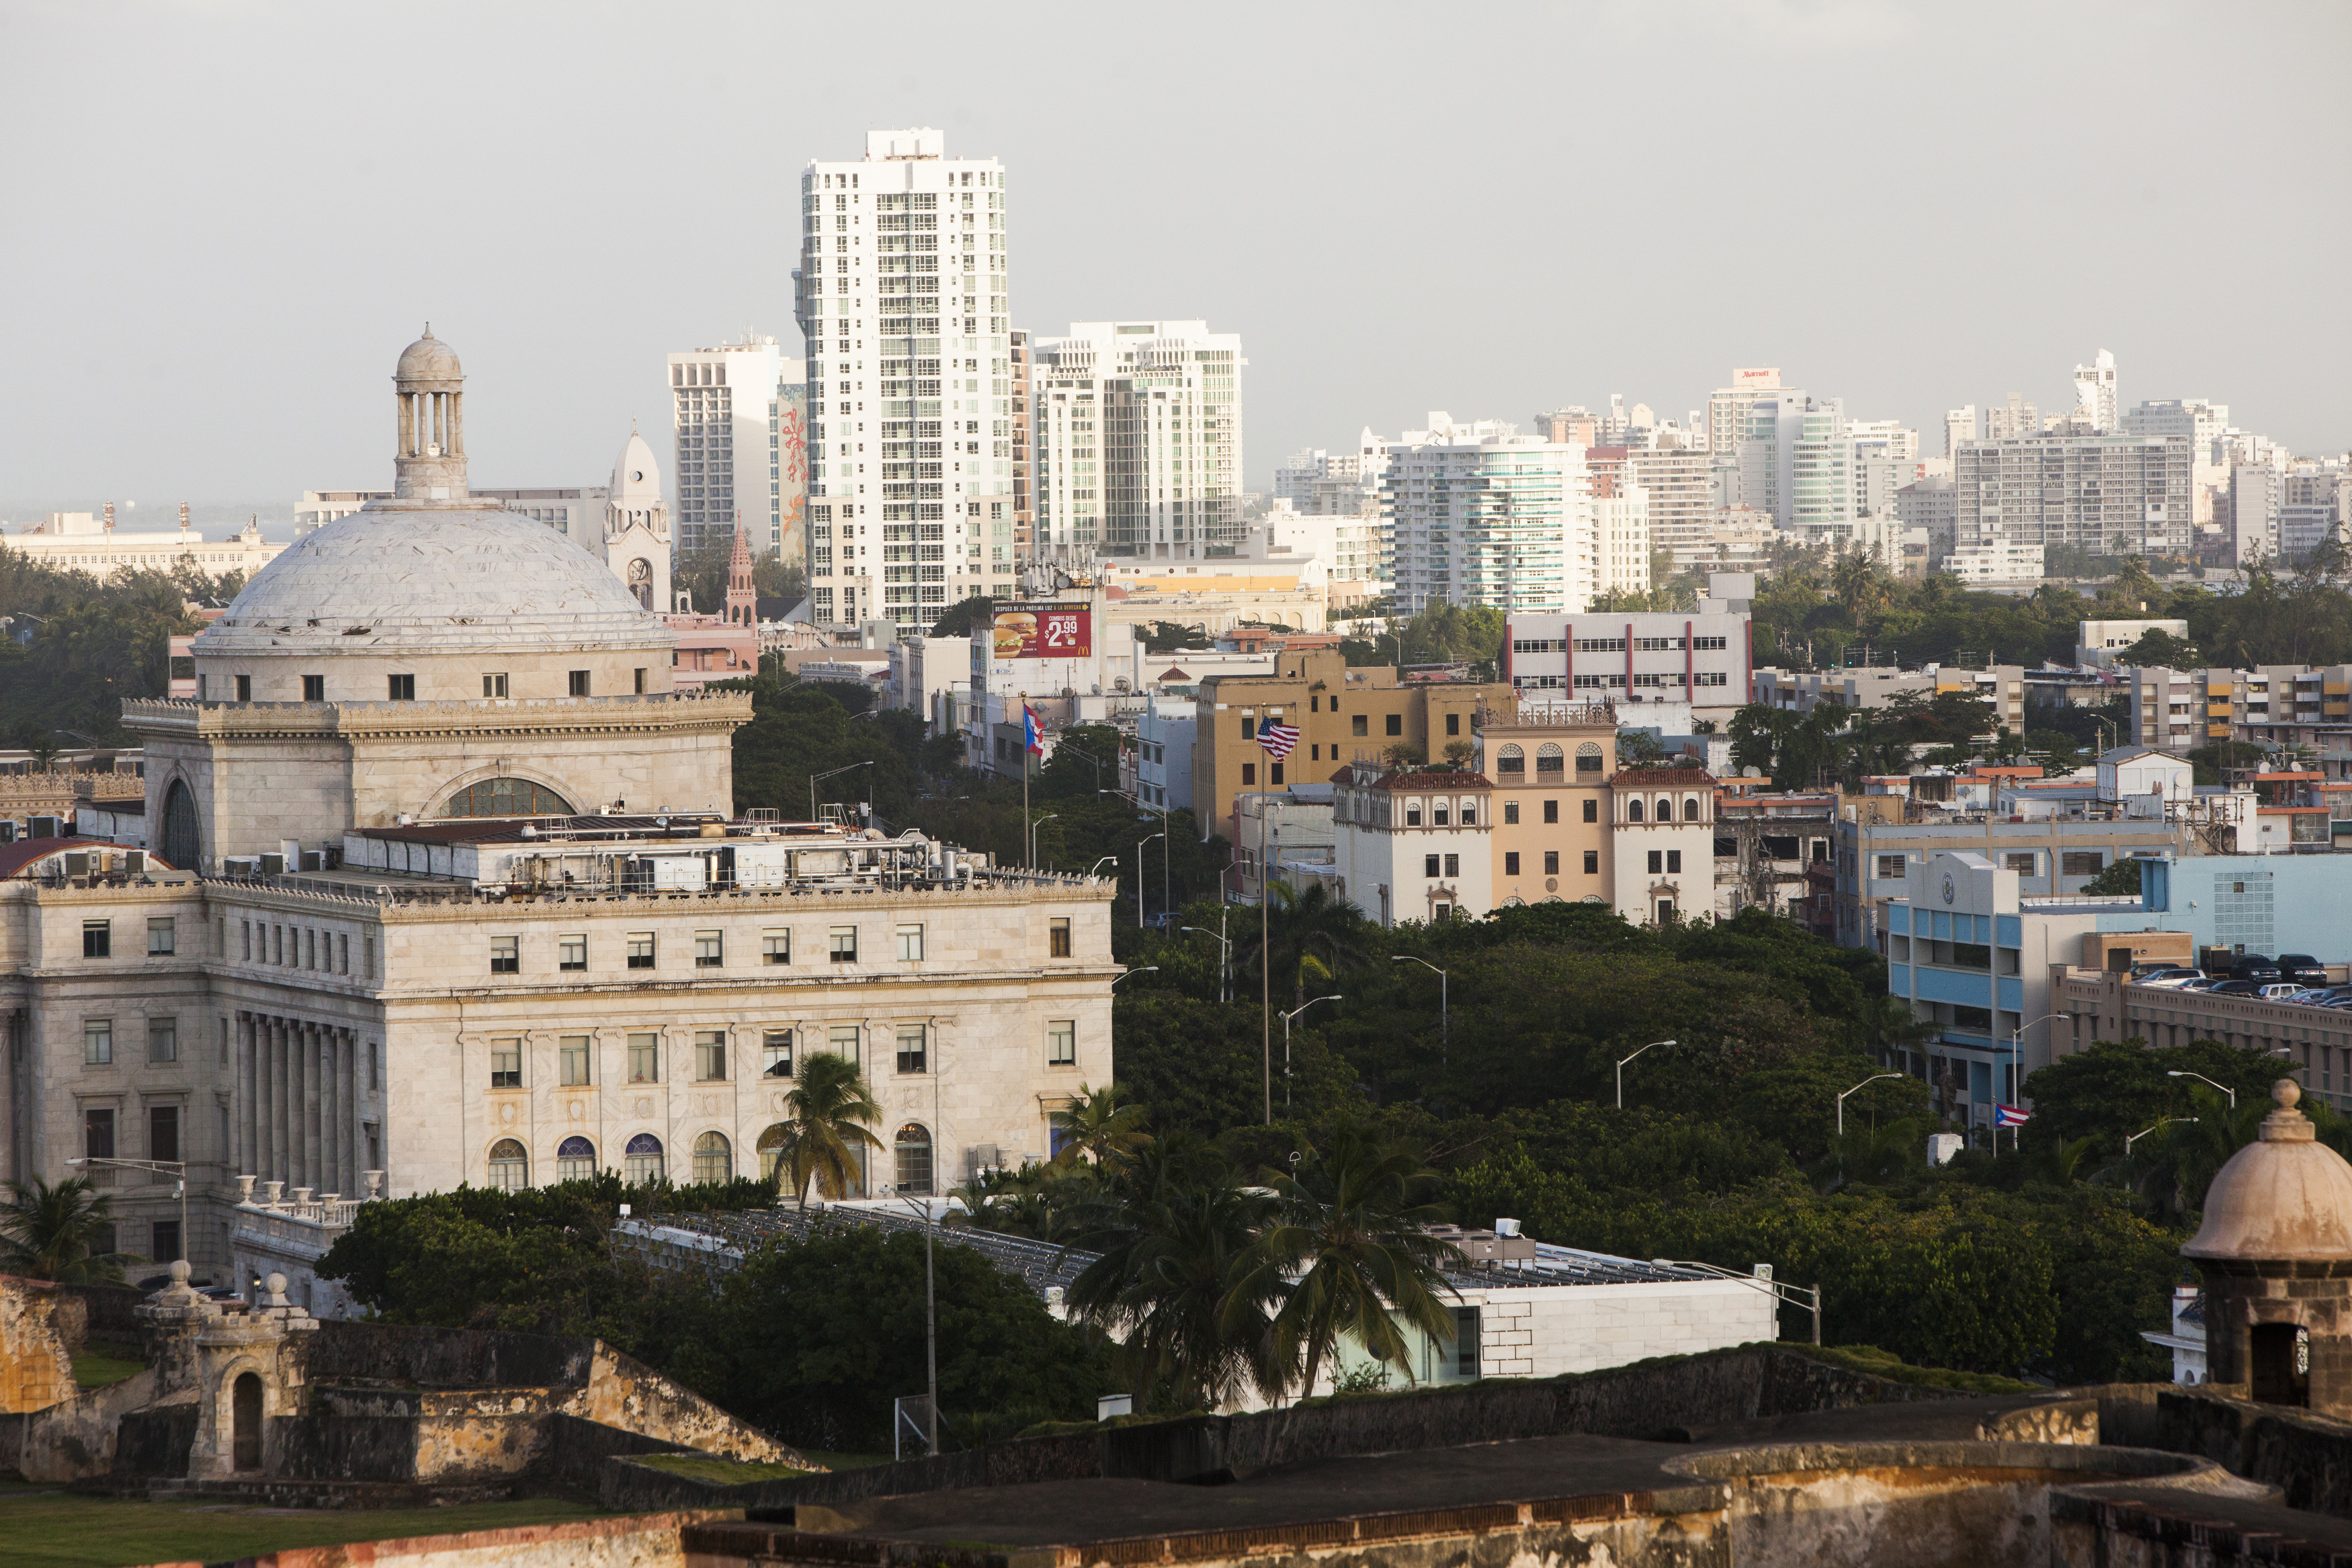 Old San Juan, the center for Puerto Rican tourism, on November 12, 2013.